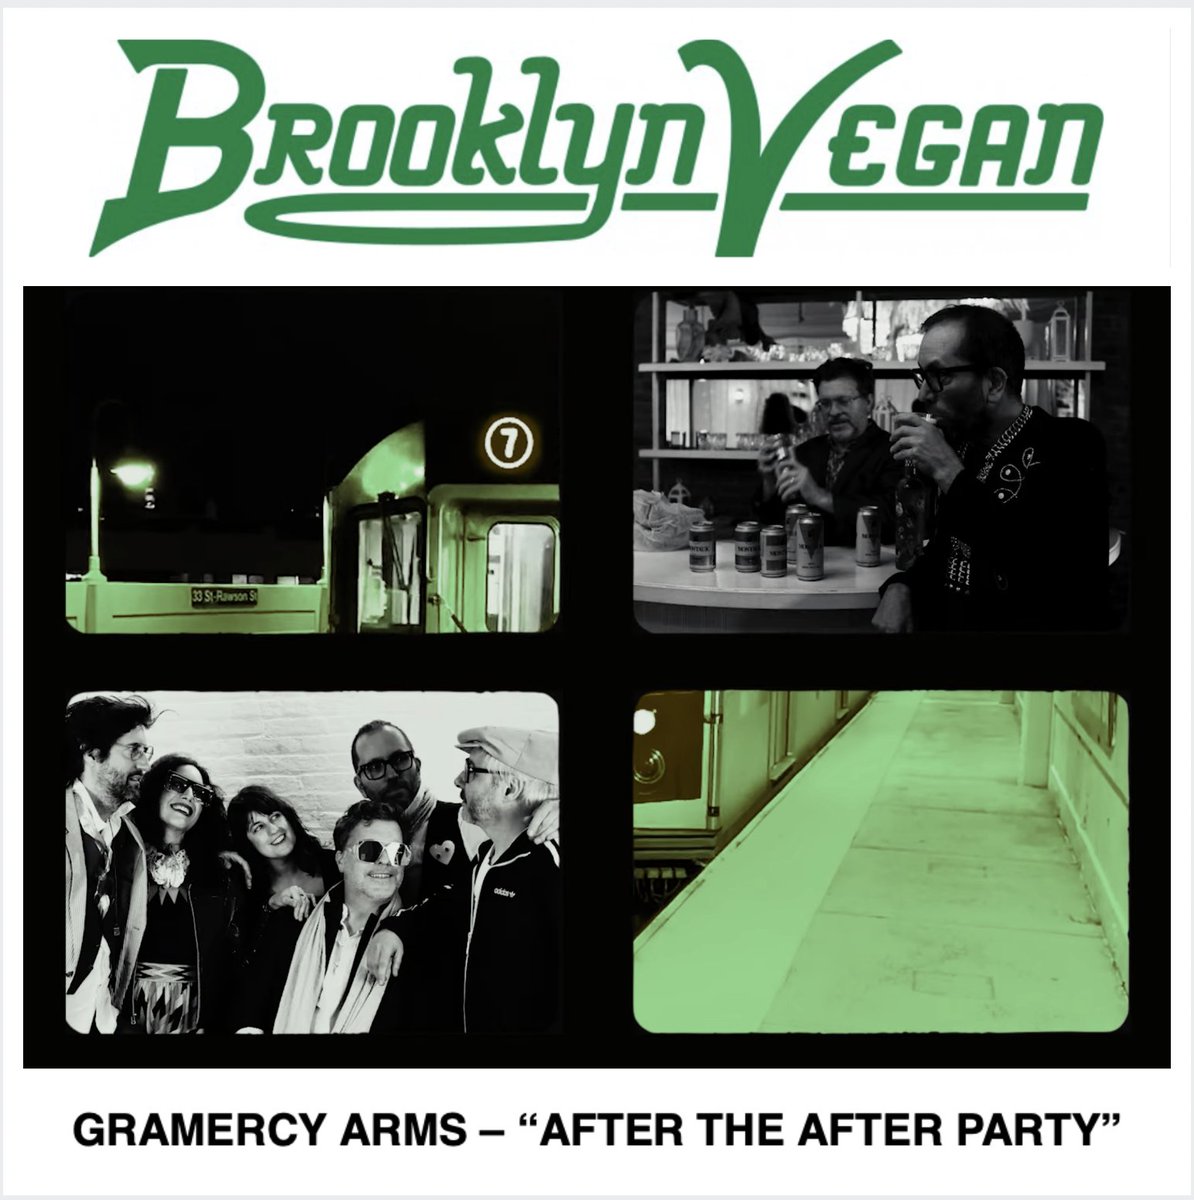 The new single 'After The After Party' by @GramercyArms has hit the ether via @MagicDoorMusic. NYC's @BrooklynVegan calls this 'a suave earworm' ~ brooklynvegan.com/30-new-songs-o… Pre-order their new album gramercyarms1.bandcamp.com/album/the-maki…